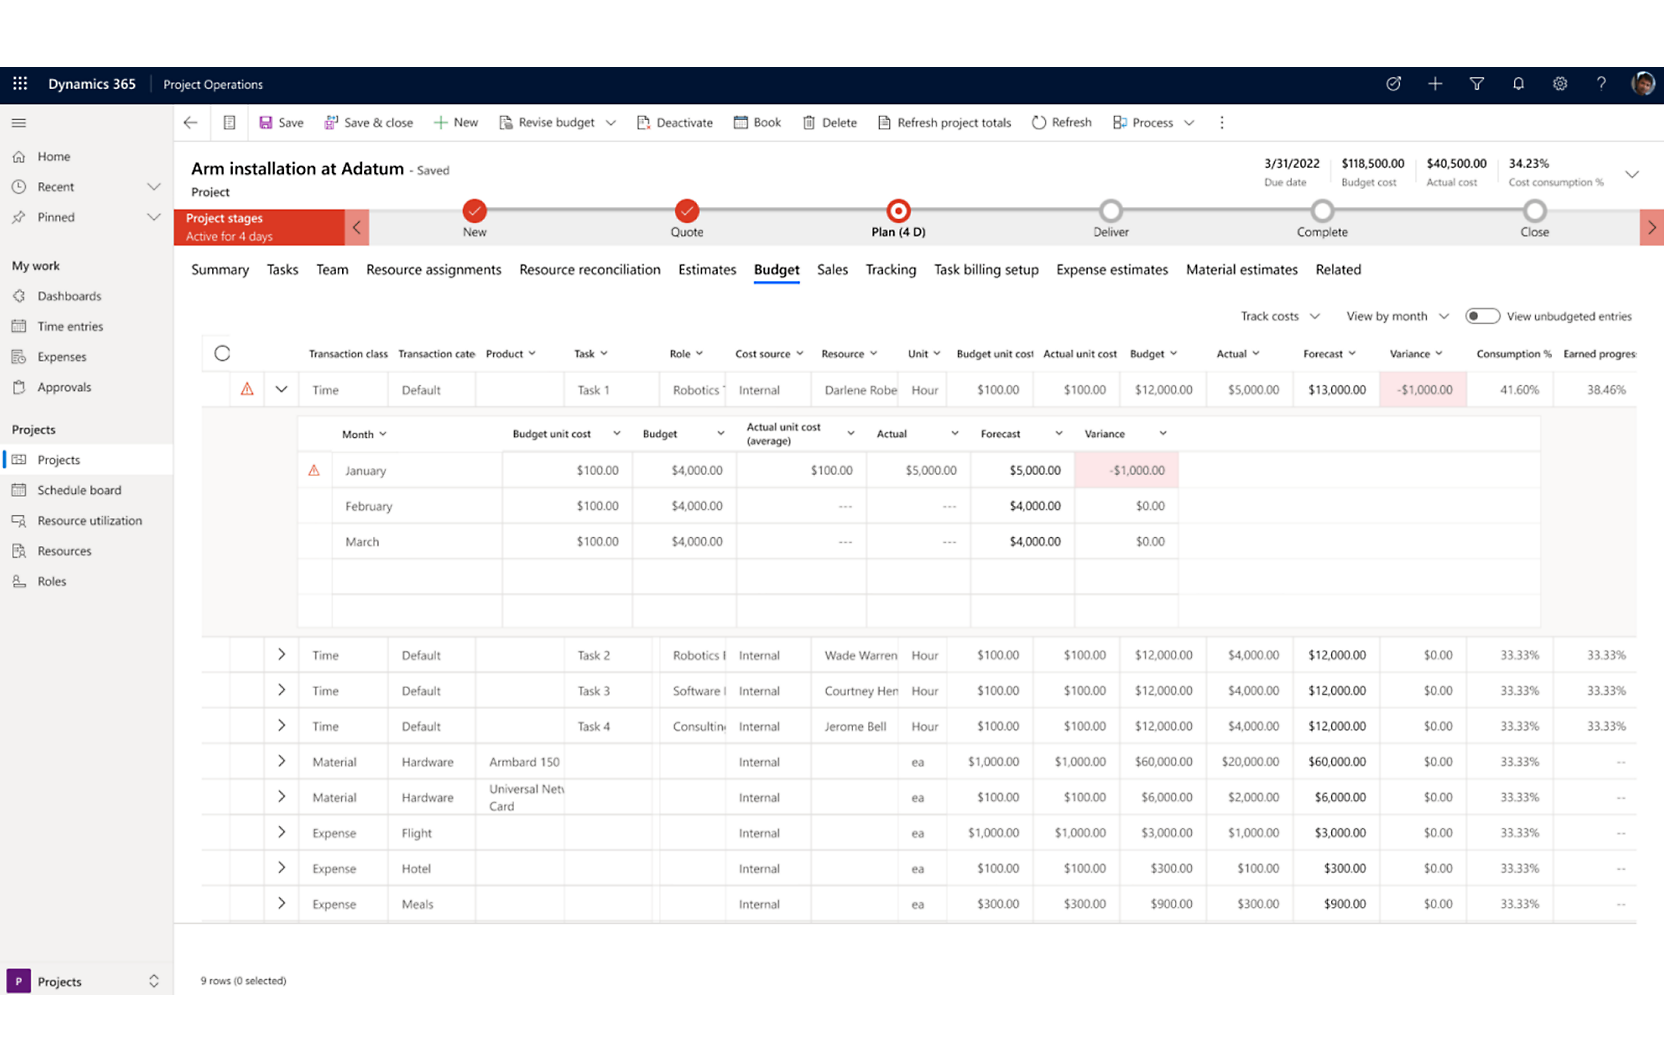 Screenshot of a budget review interface in microsoft dynamics 365 with a focus on project operations